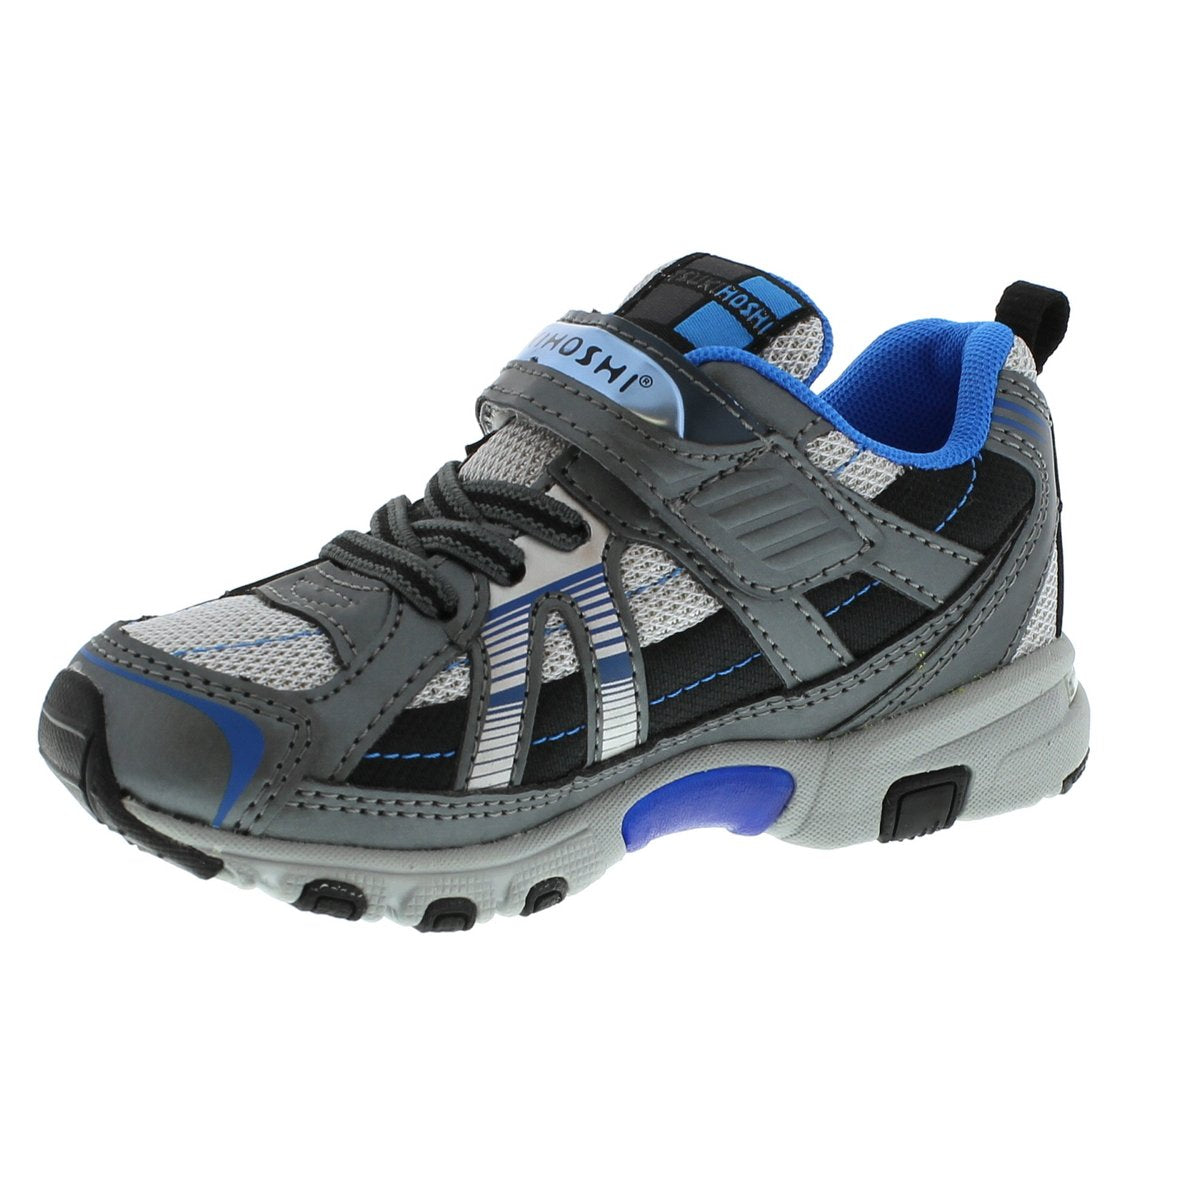 Childrens Tsukihoshi Storm Sneaker in Graphite/Royal from the front view